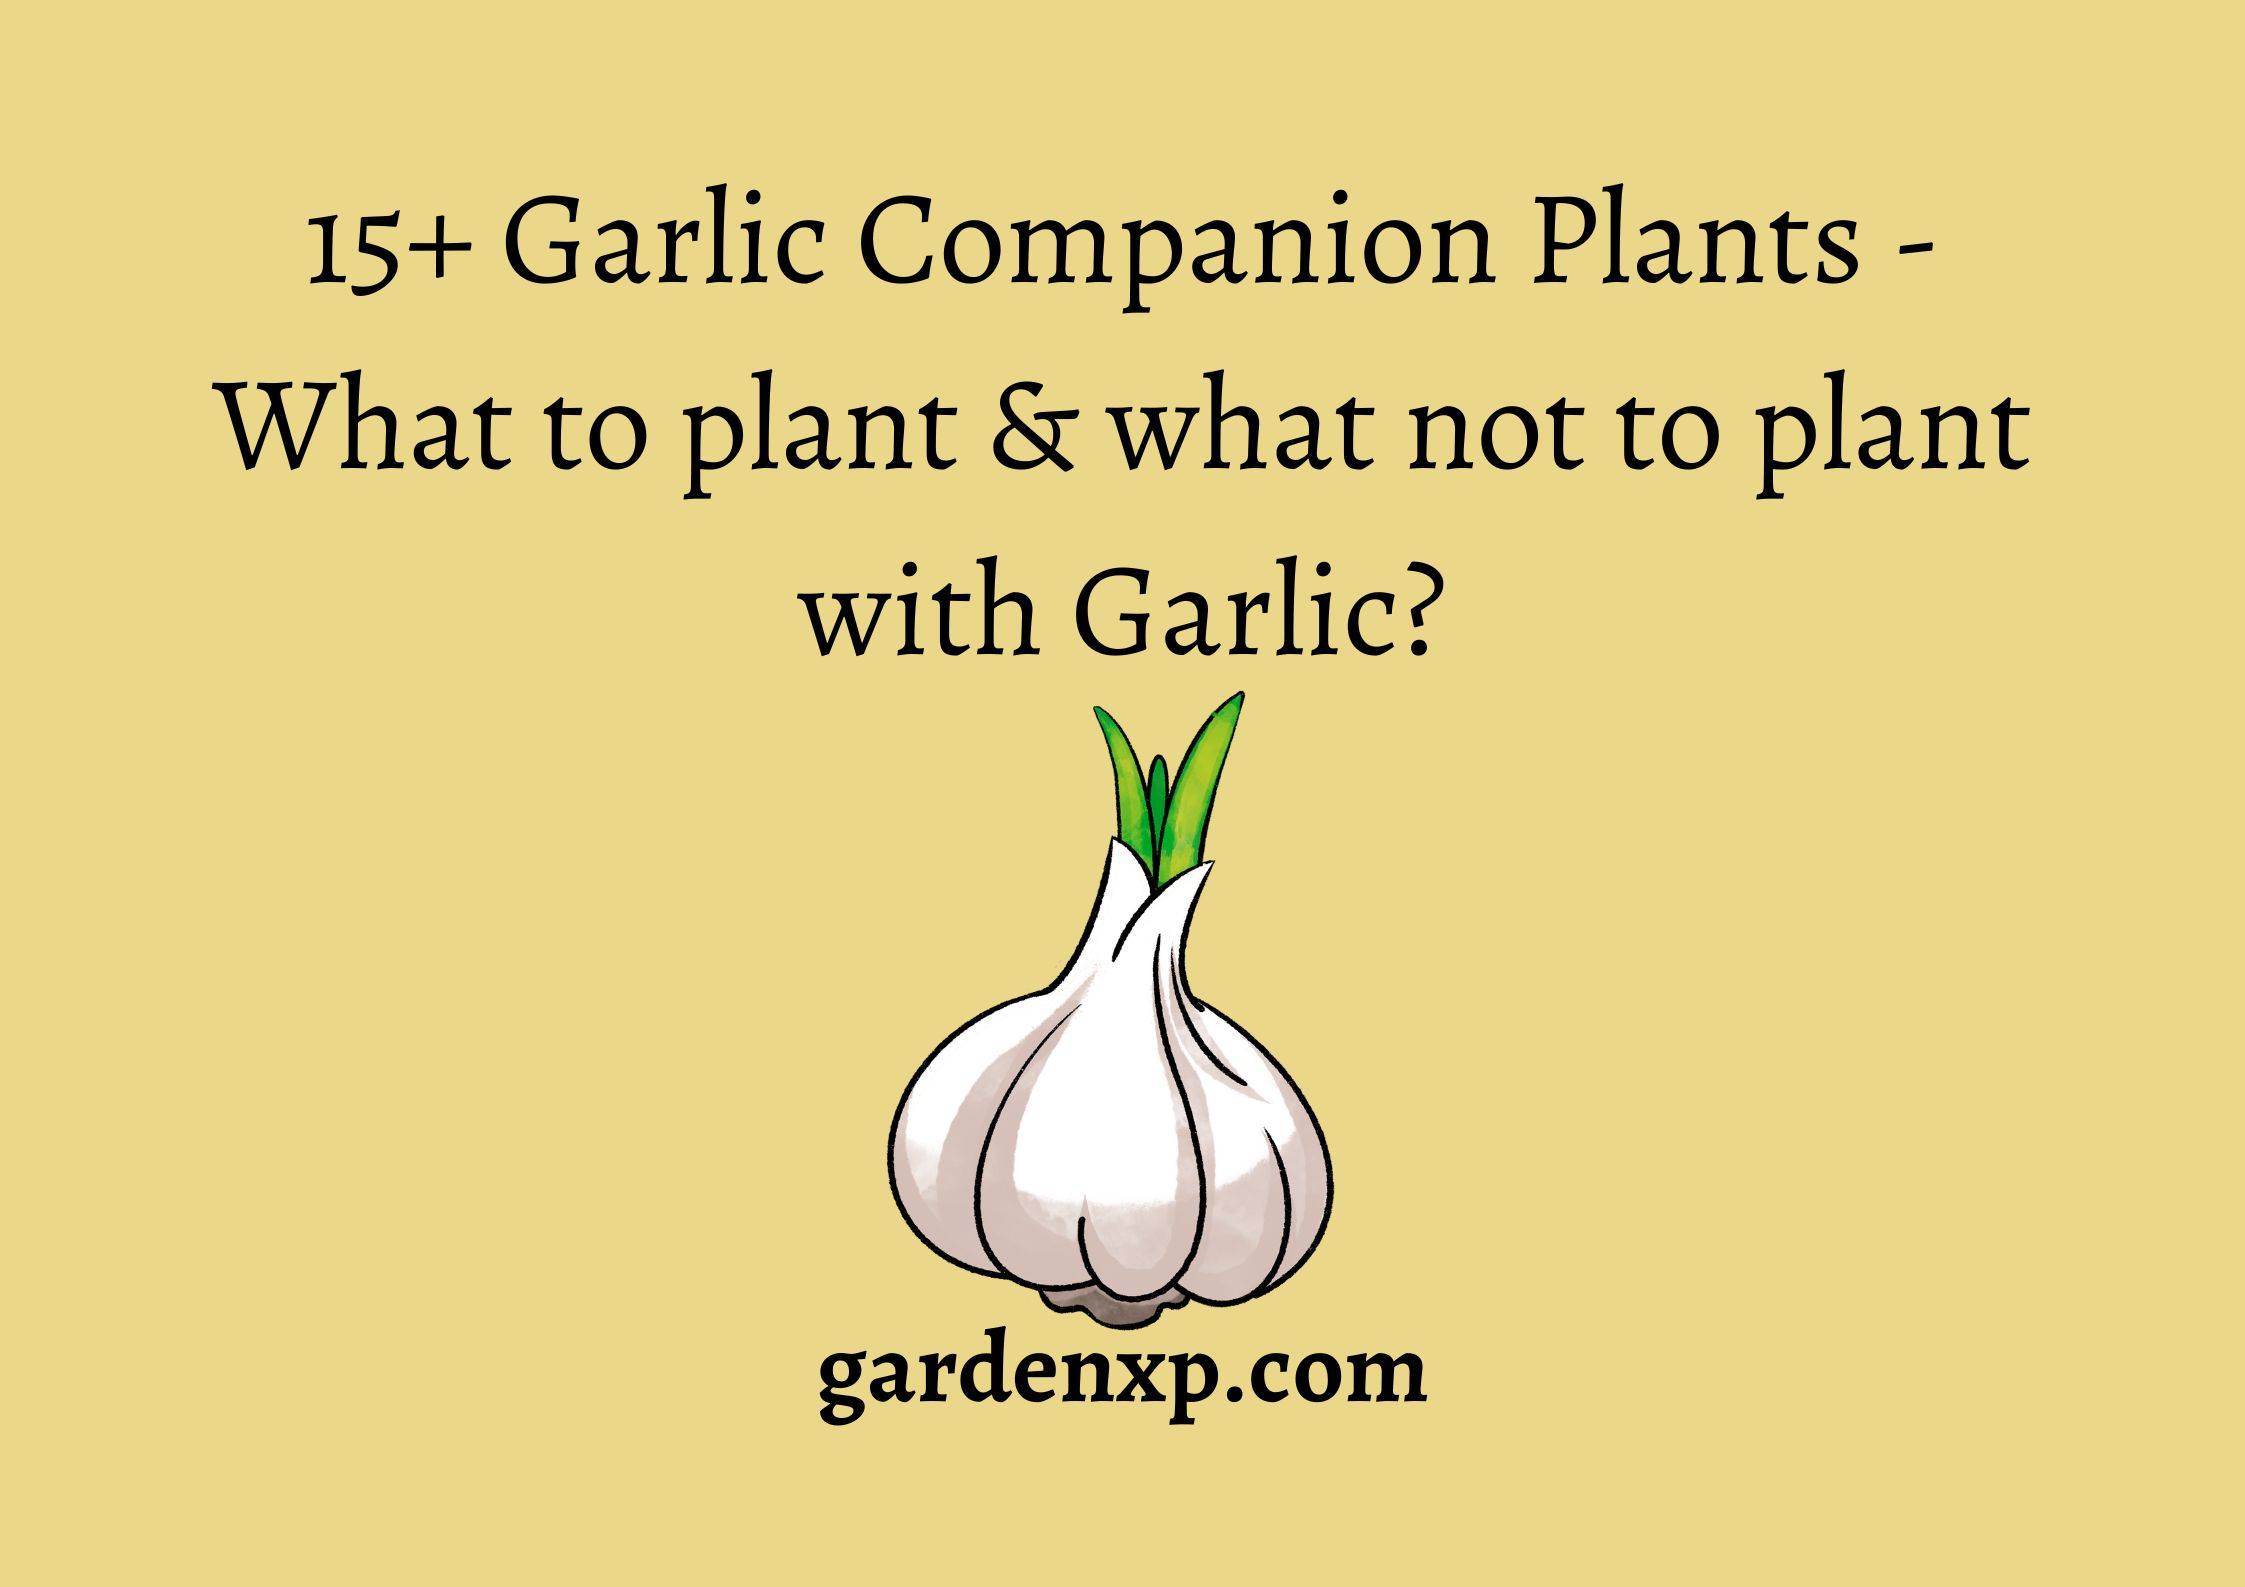 15+ Garlic Companion Plants - What to plant & what not to plant with Garlic?